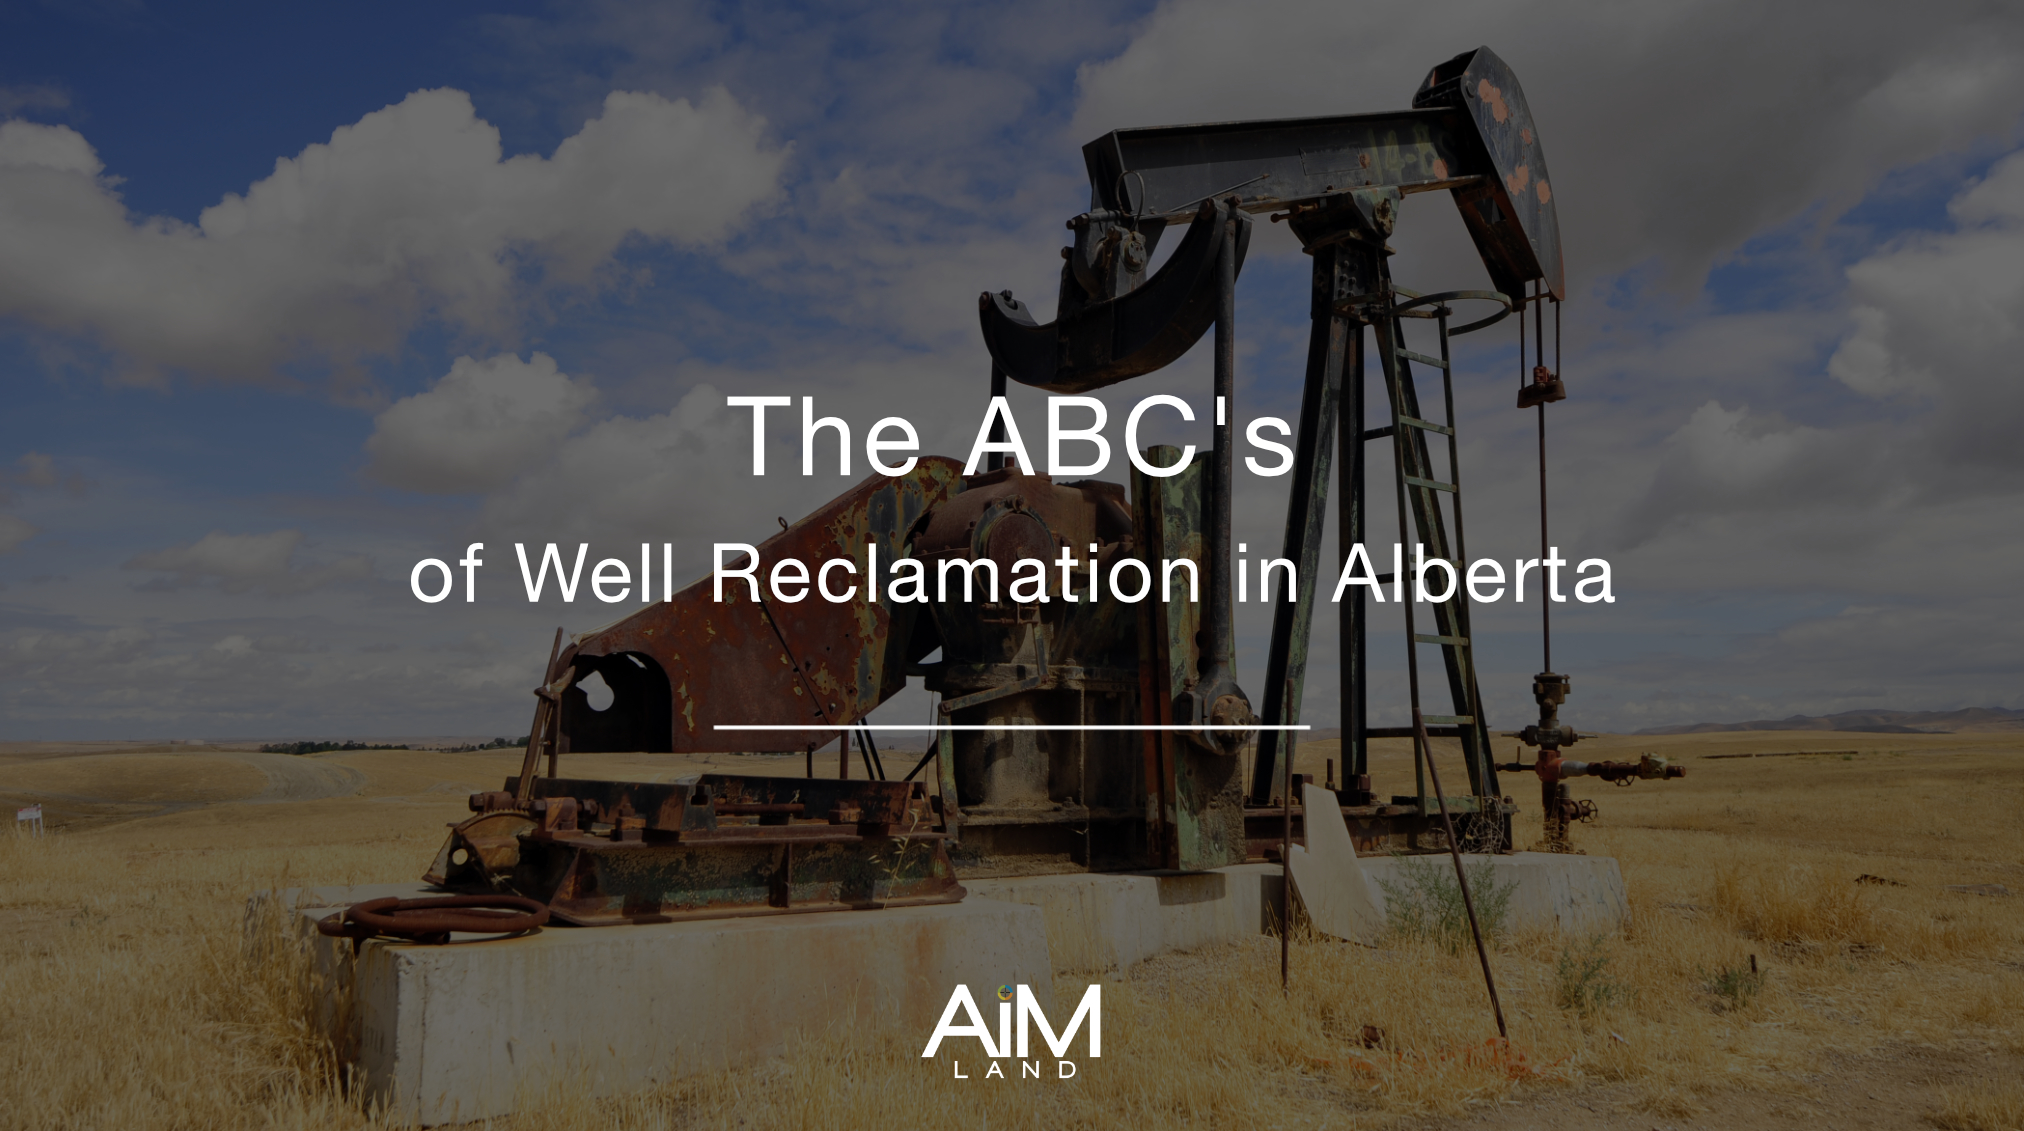 AiM Remediation and Well Reclamation